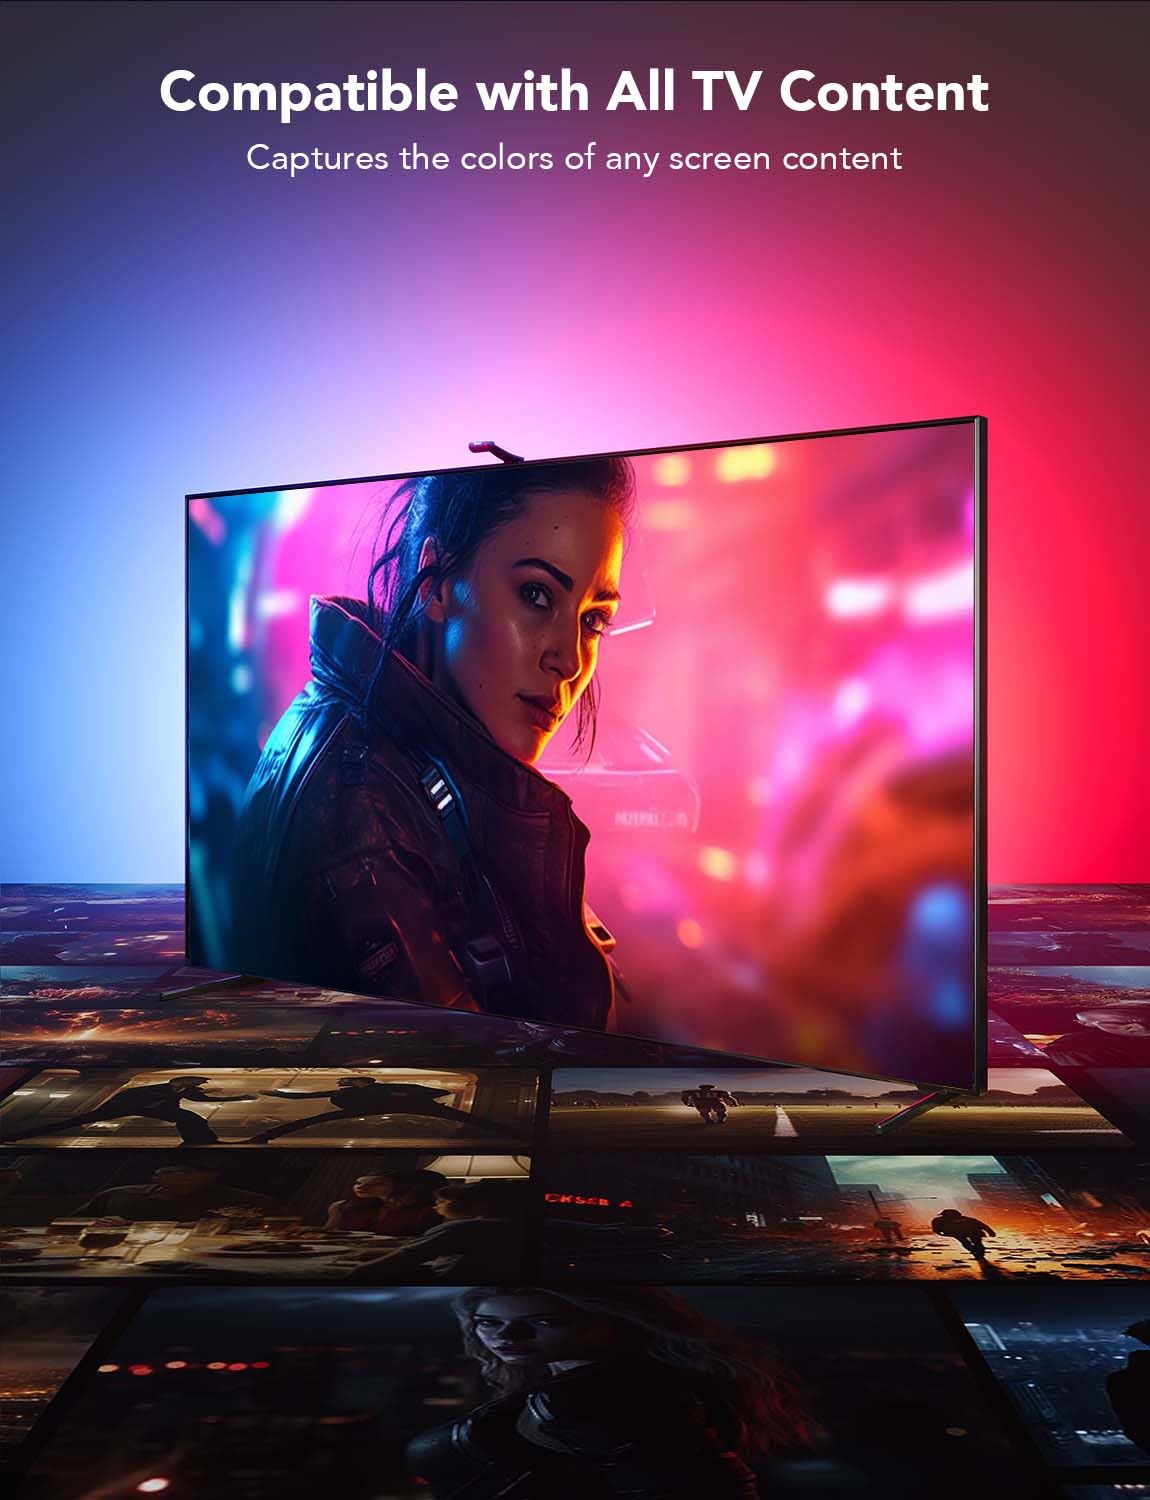 Govee Envisual TV Backlight T2 with Dual Cameras, 16.4ft RGBIC Wi-Fi TV LED Backlights for 75-85 inch TVs, Double Light Beads, Adapts to Ultra-Thin TVs, Smart App Control, Music Sync, H605C